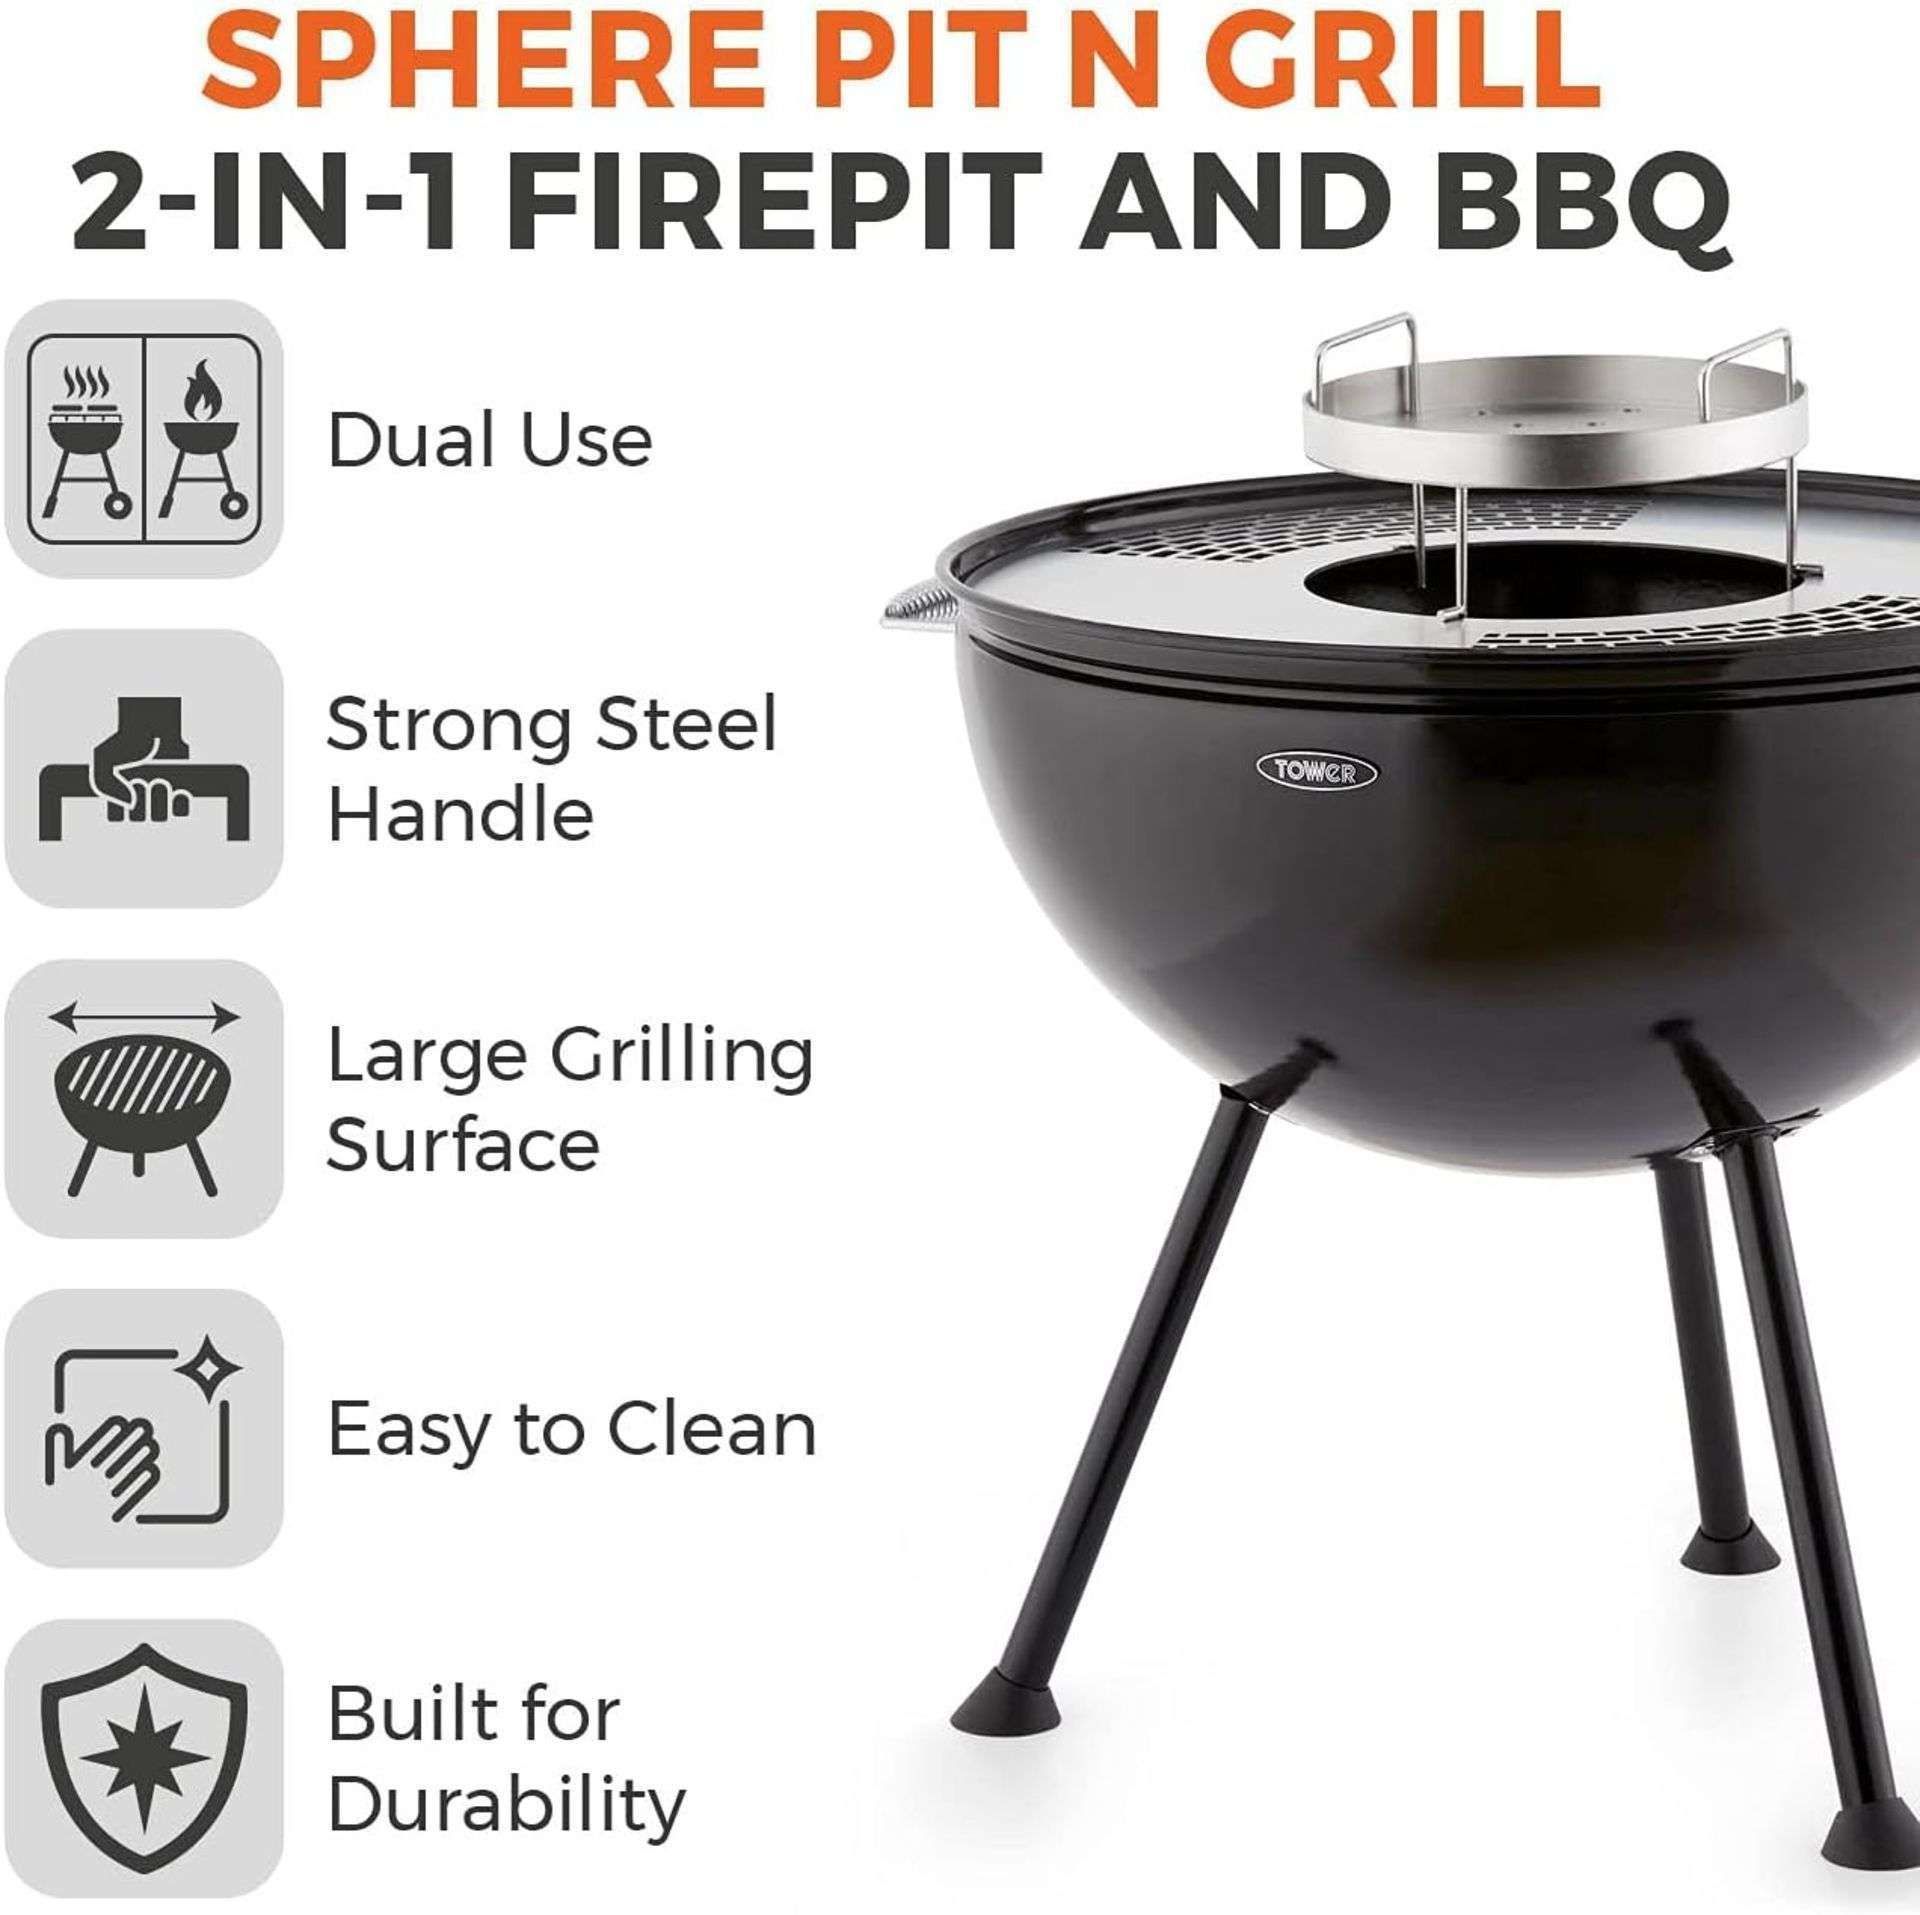 New & Boxed Tower Sphere Fire Pit and BBQ Grill, Black. (VQ577). DUAL USE â€“ This multi- - Image 2 of 5